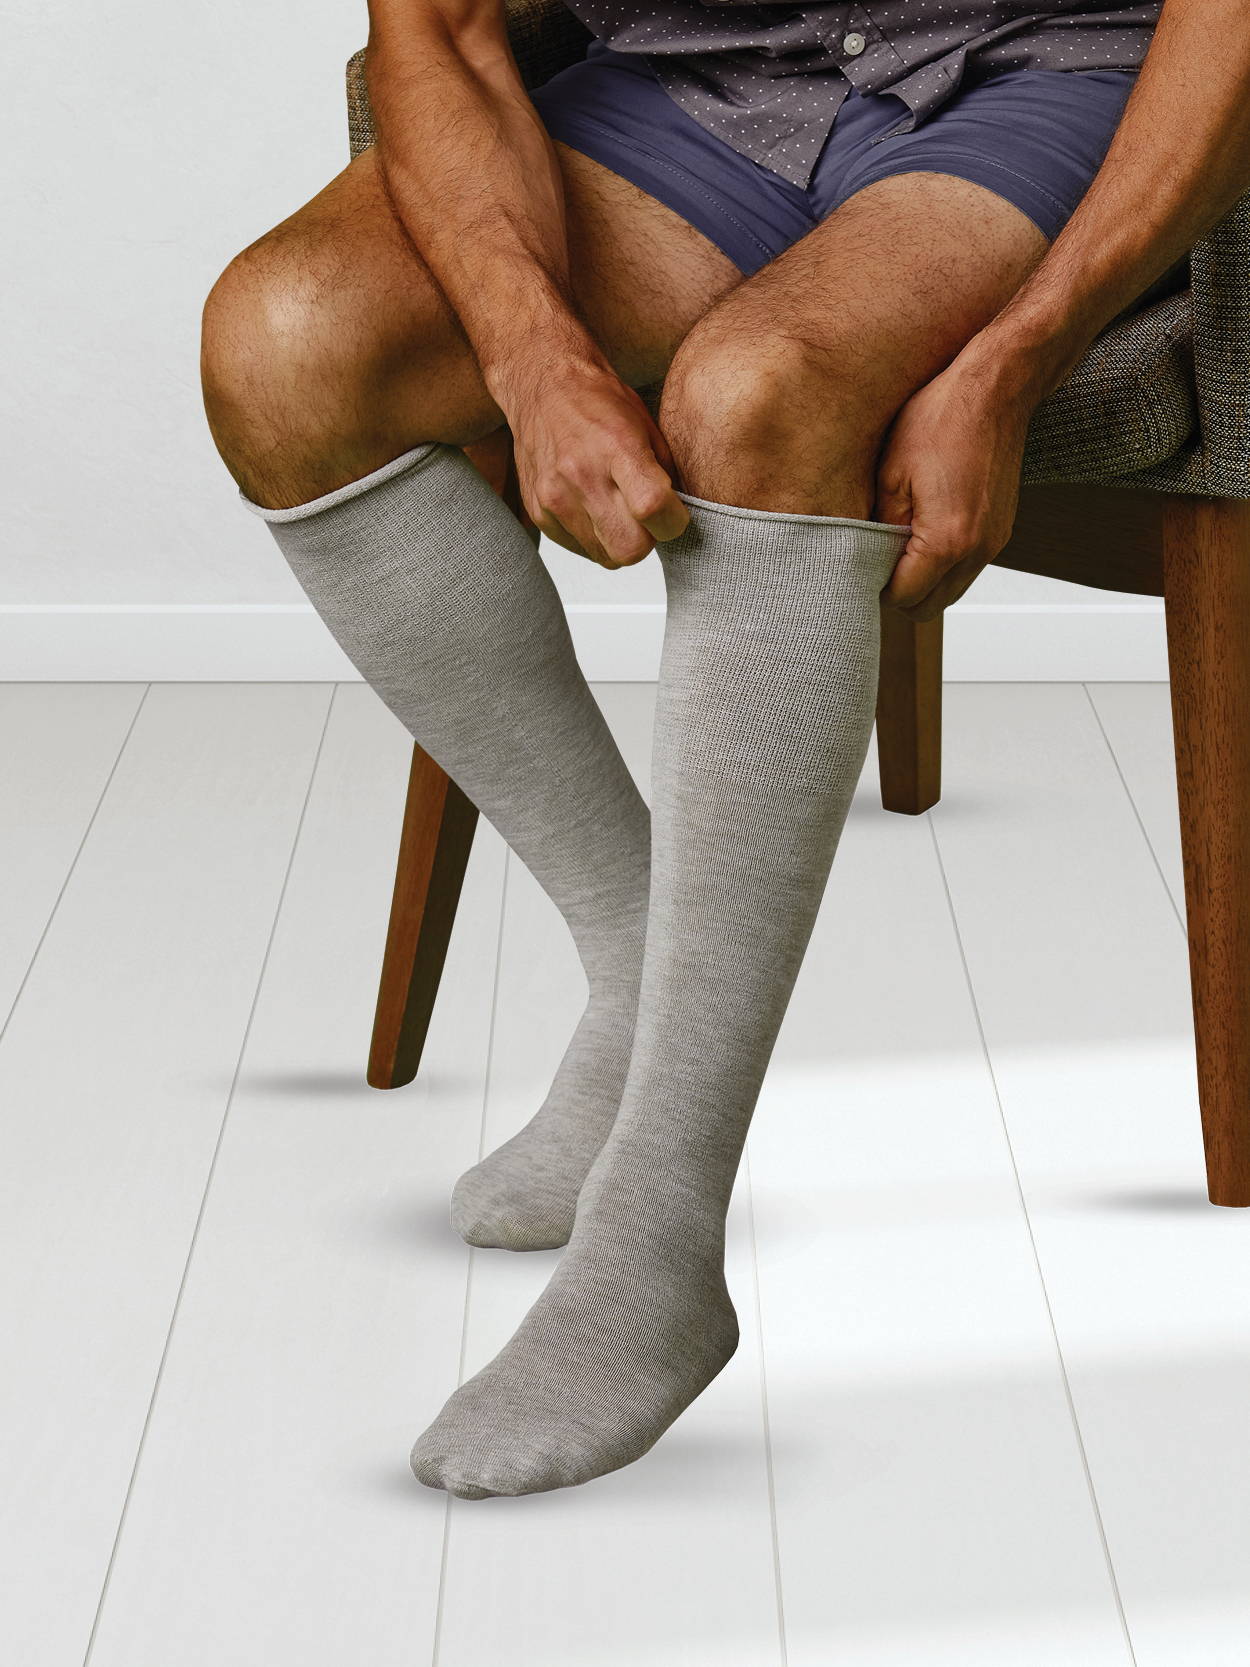 Man sitting in chair putting on SmartKnit AFO sock